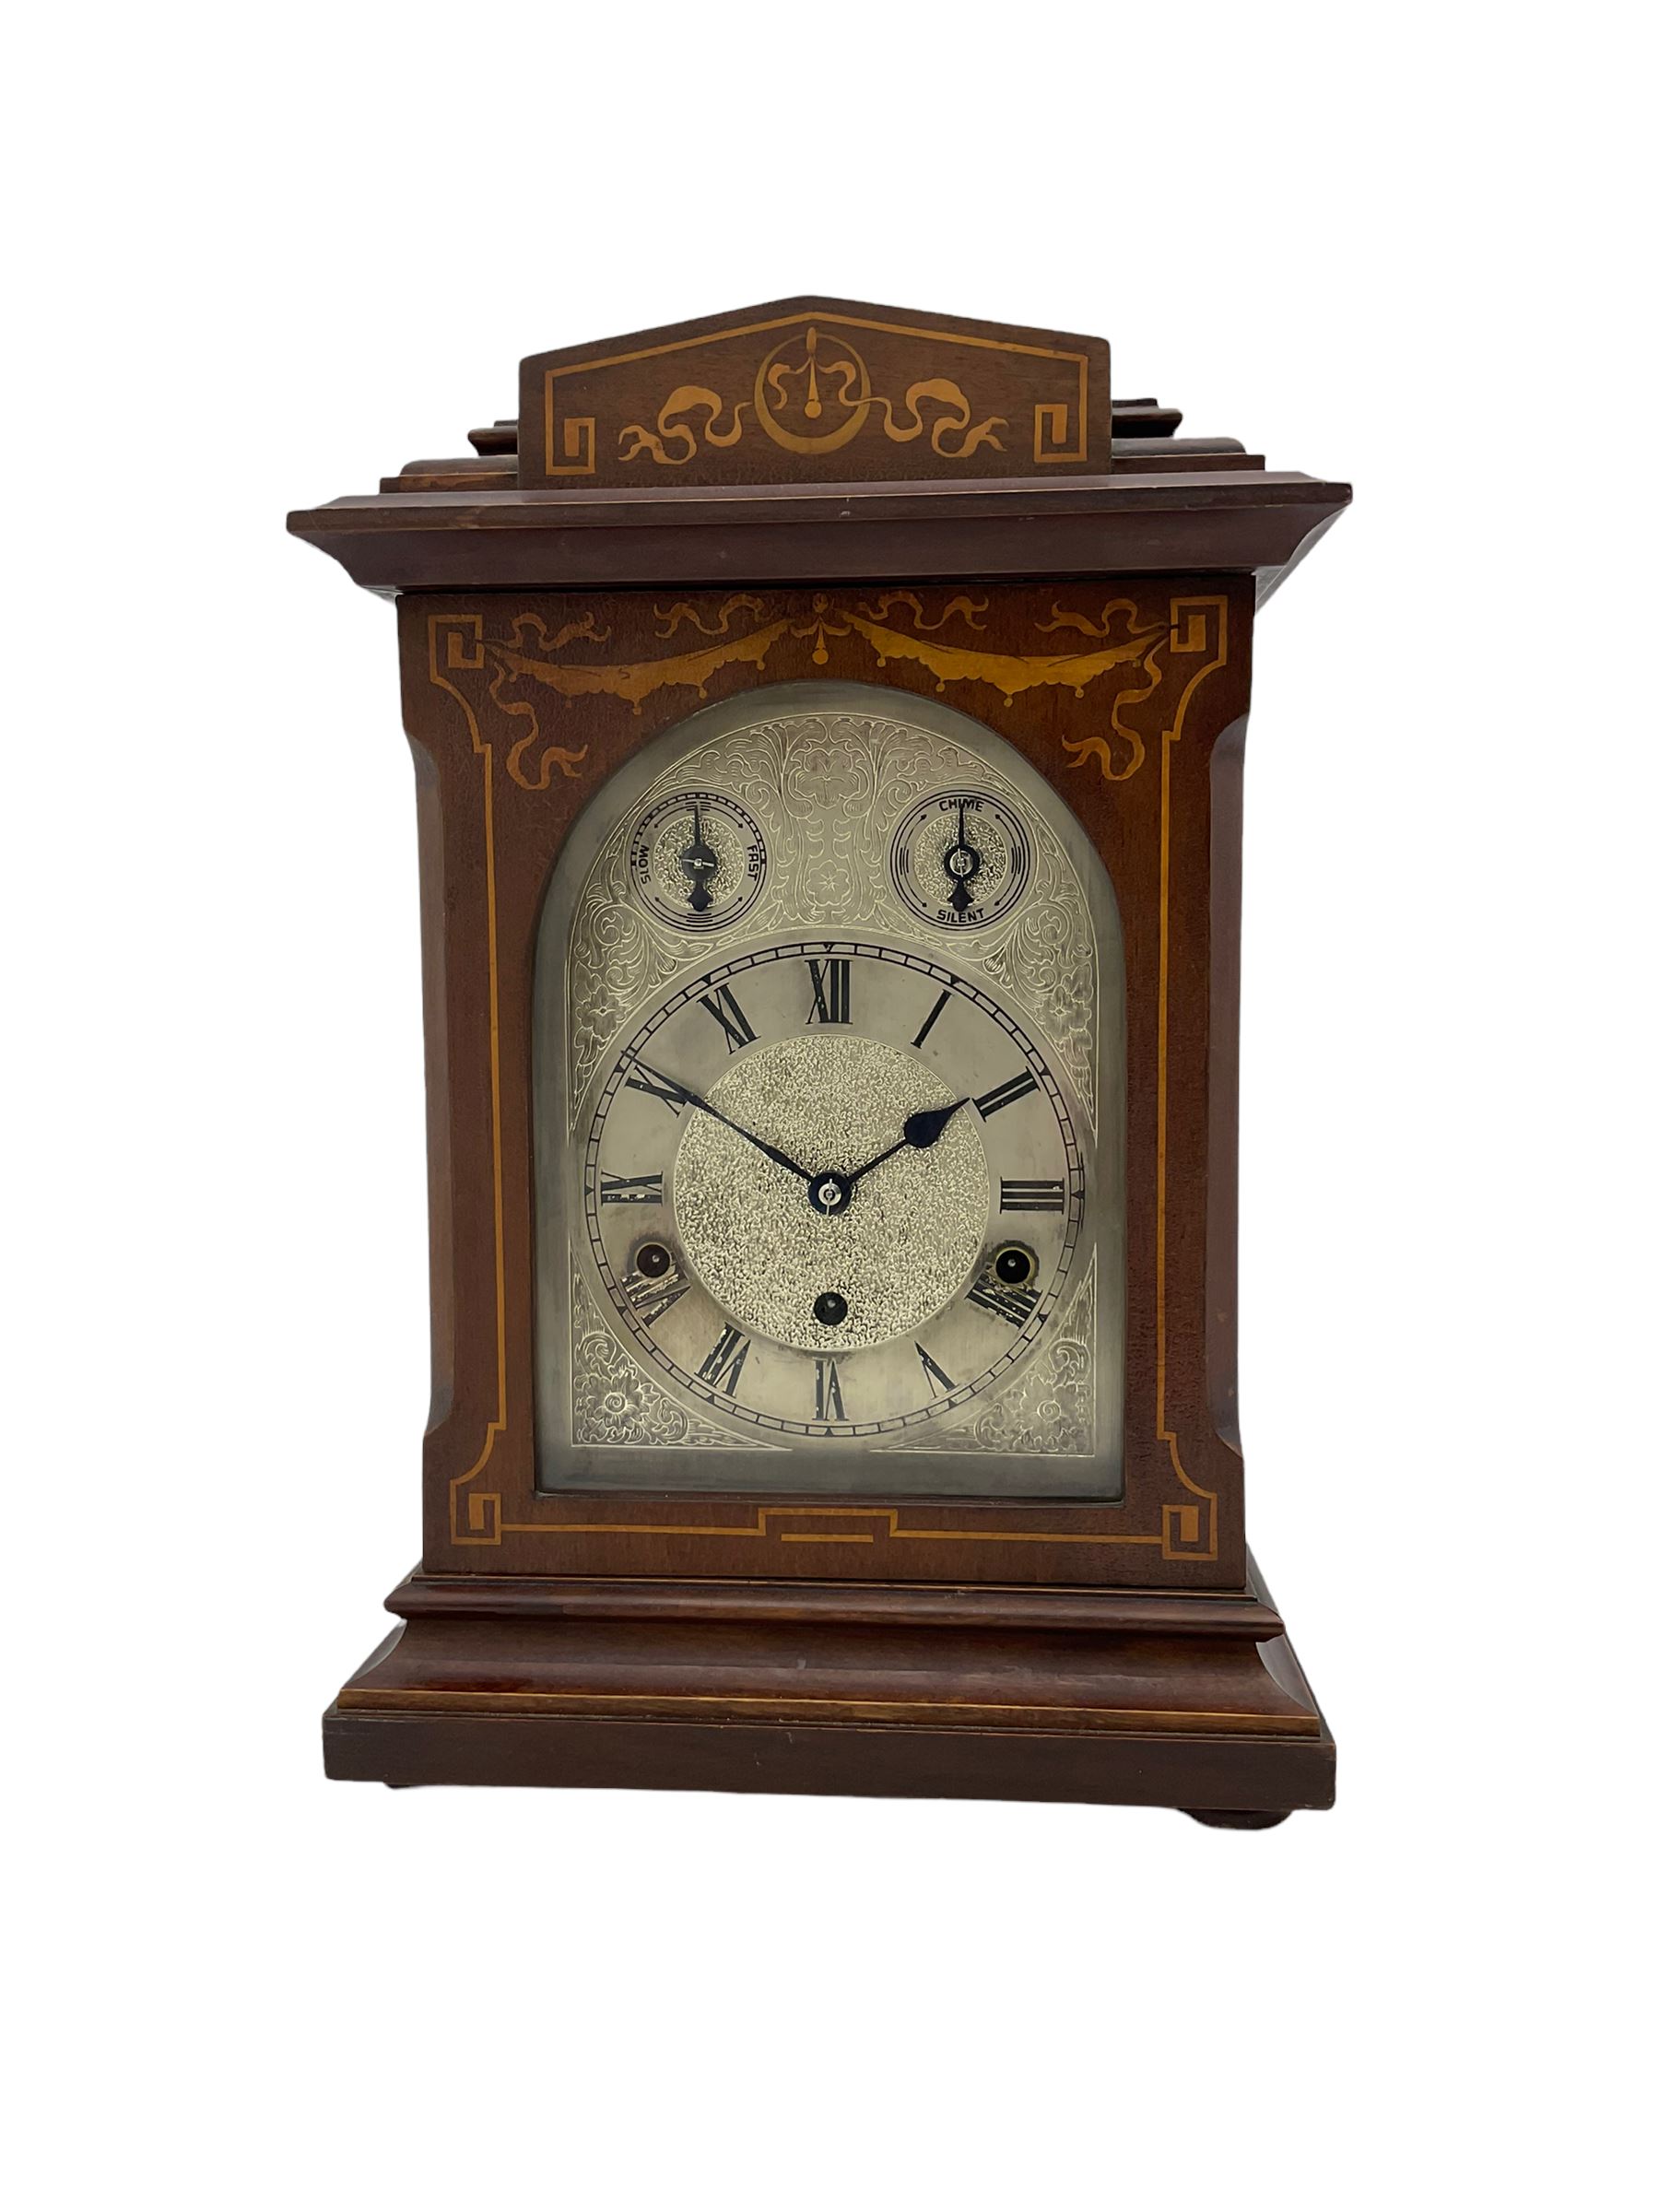 An Edwardian c1905 Westminster chiming mantle clock in a mahogany Sheraton style case with inlay an